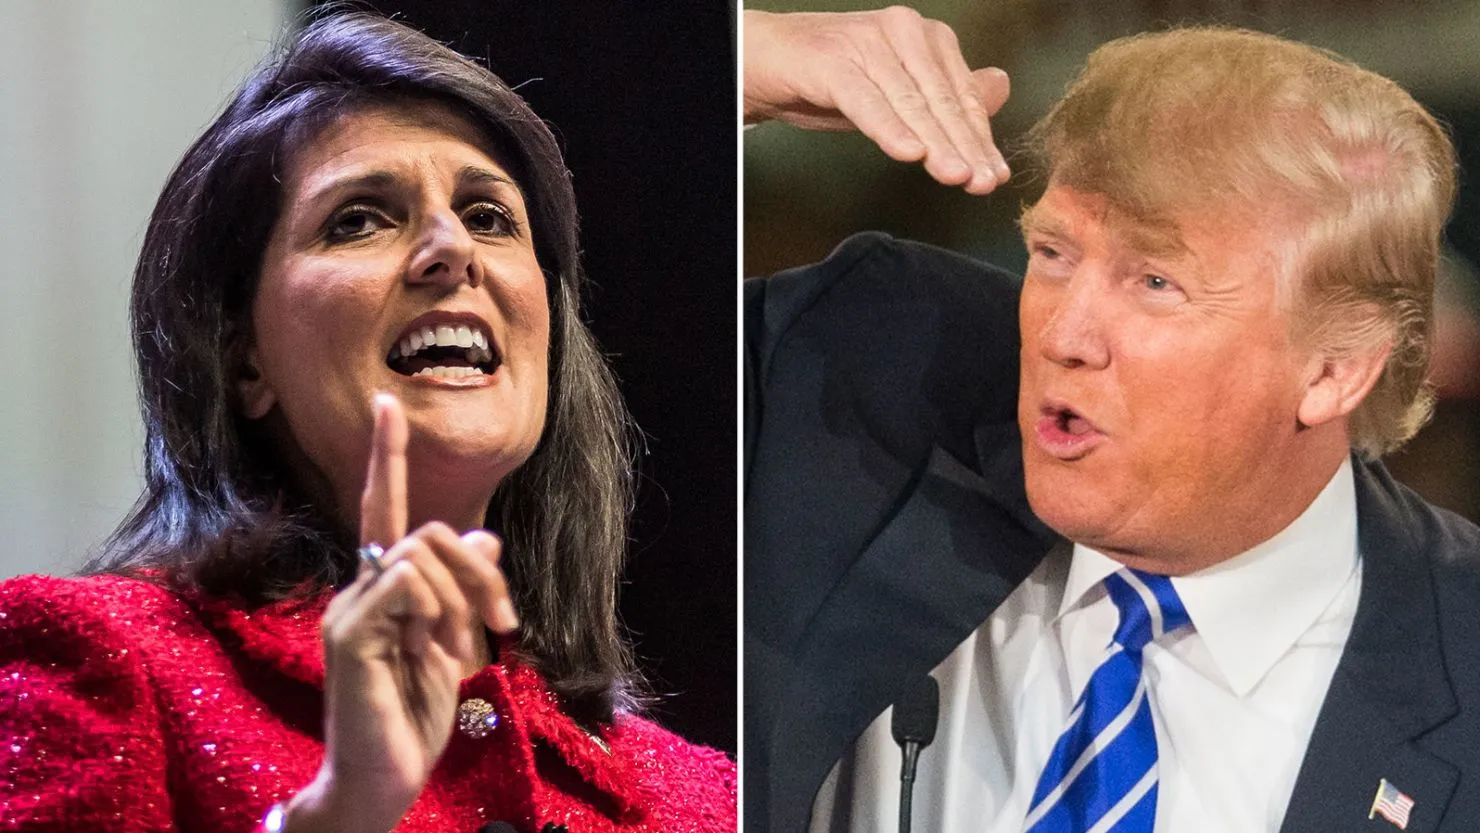 us-presidential-candidate-nikki-haley-makes-a-surprise-appearance-on-snl-and-takes-a-jab-at-donald-trump